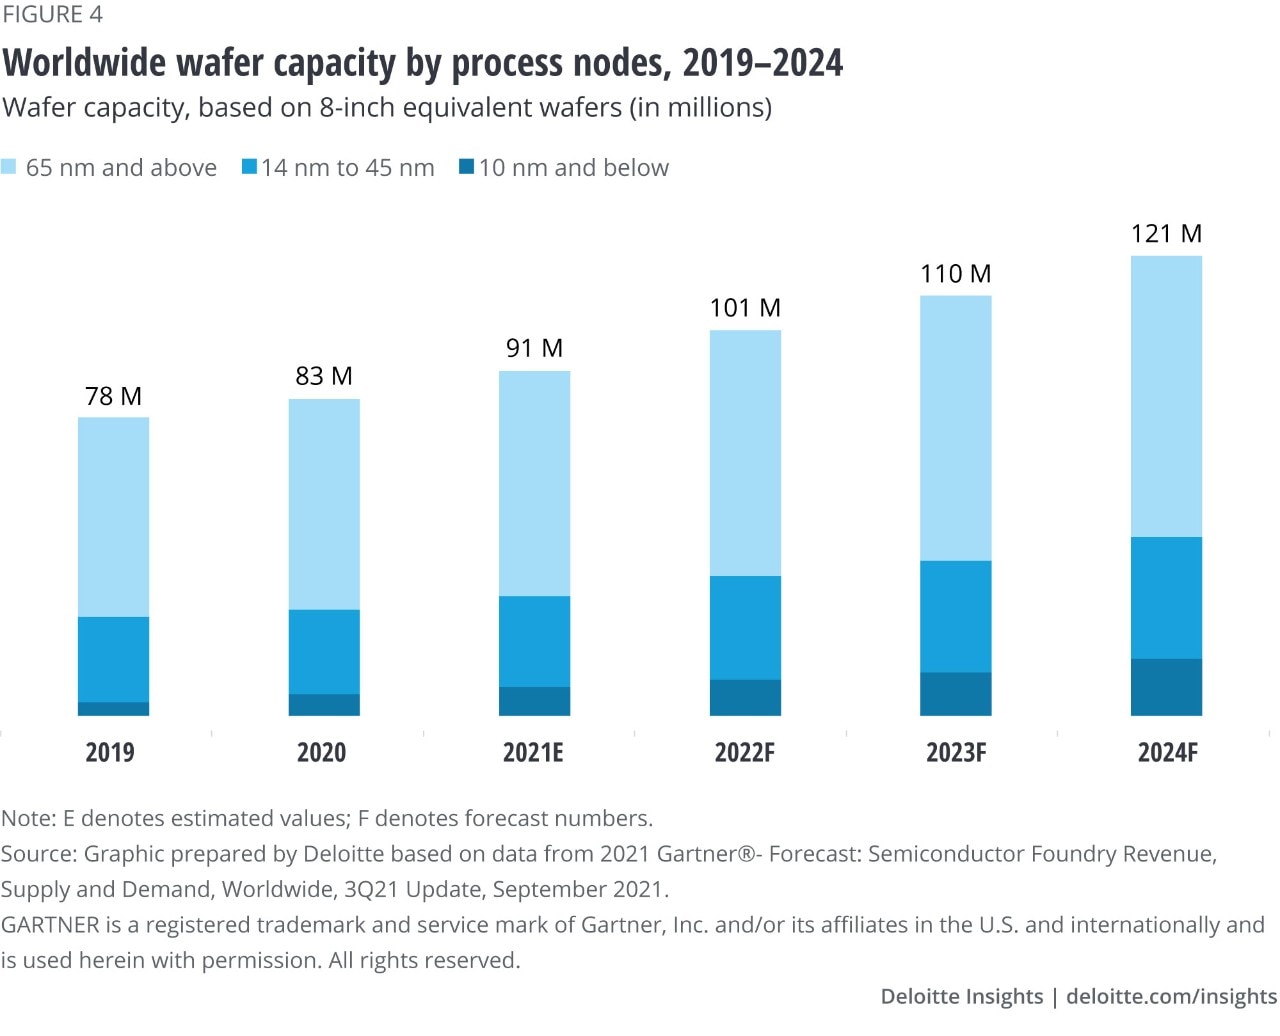 Figure 4. Wafer capacity, worldwide, by process nodes, 2019-2024